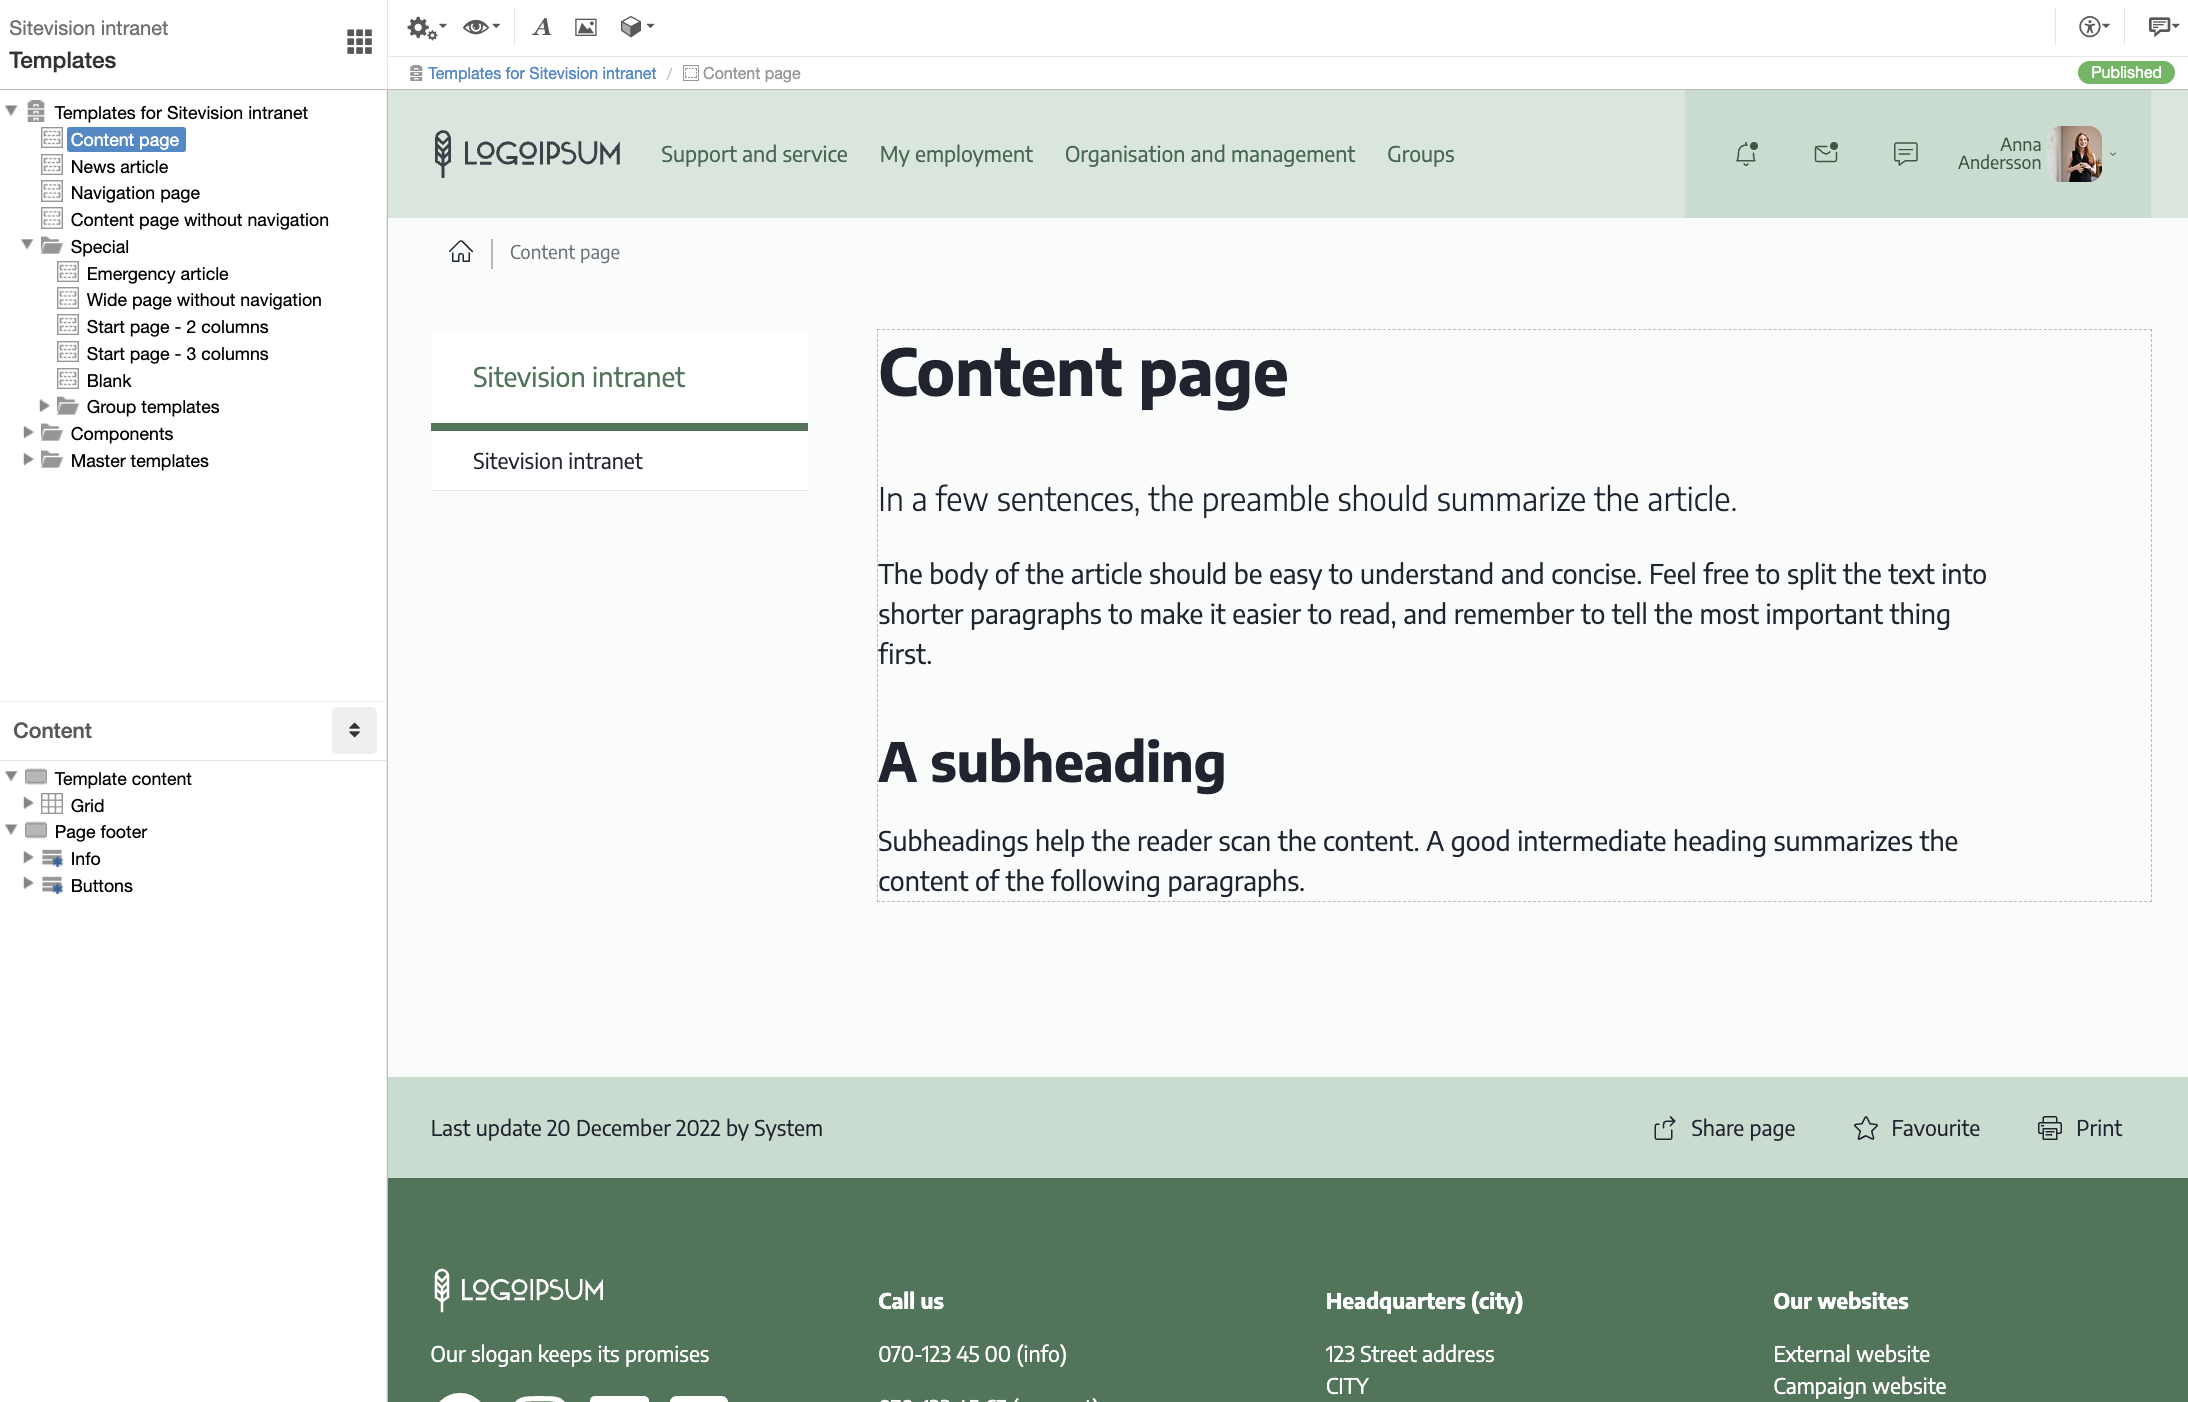 Templates - Content page